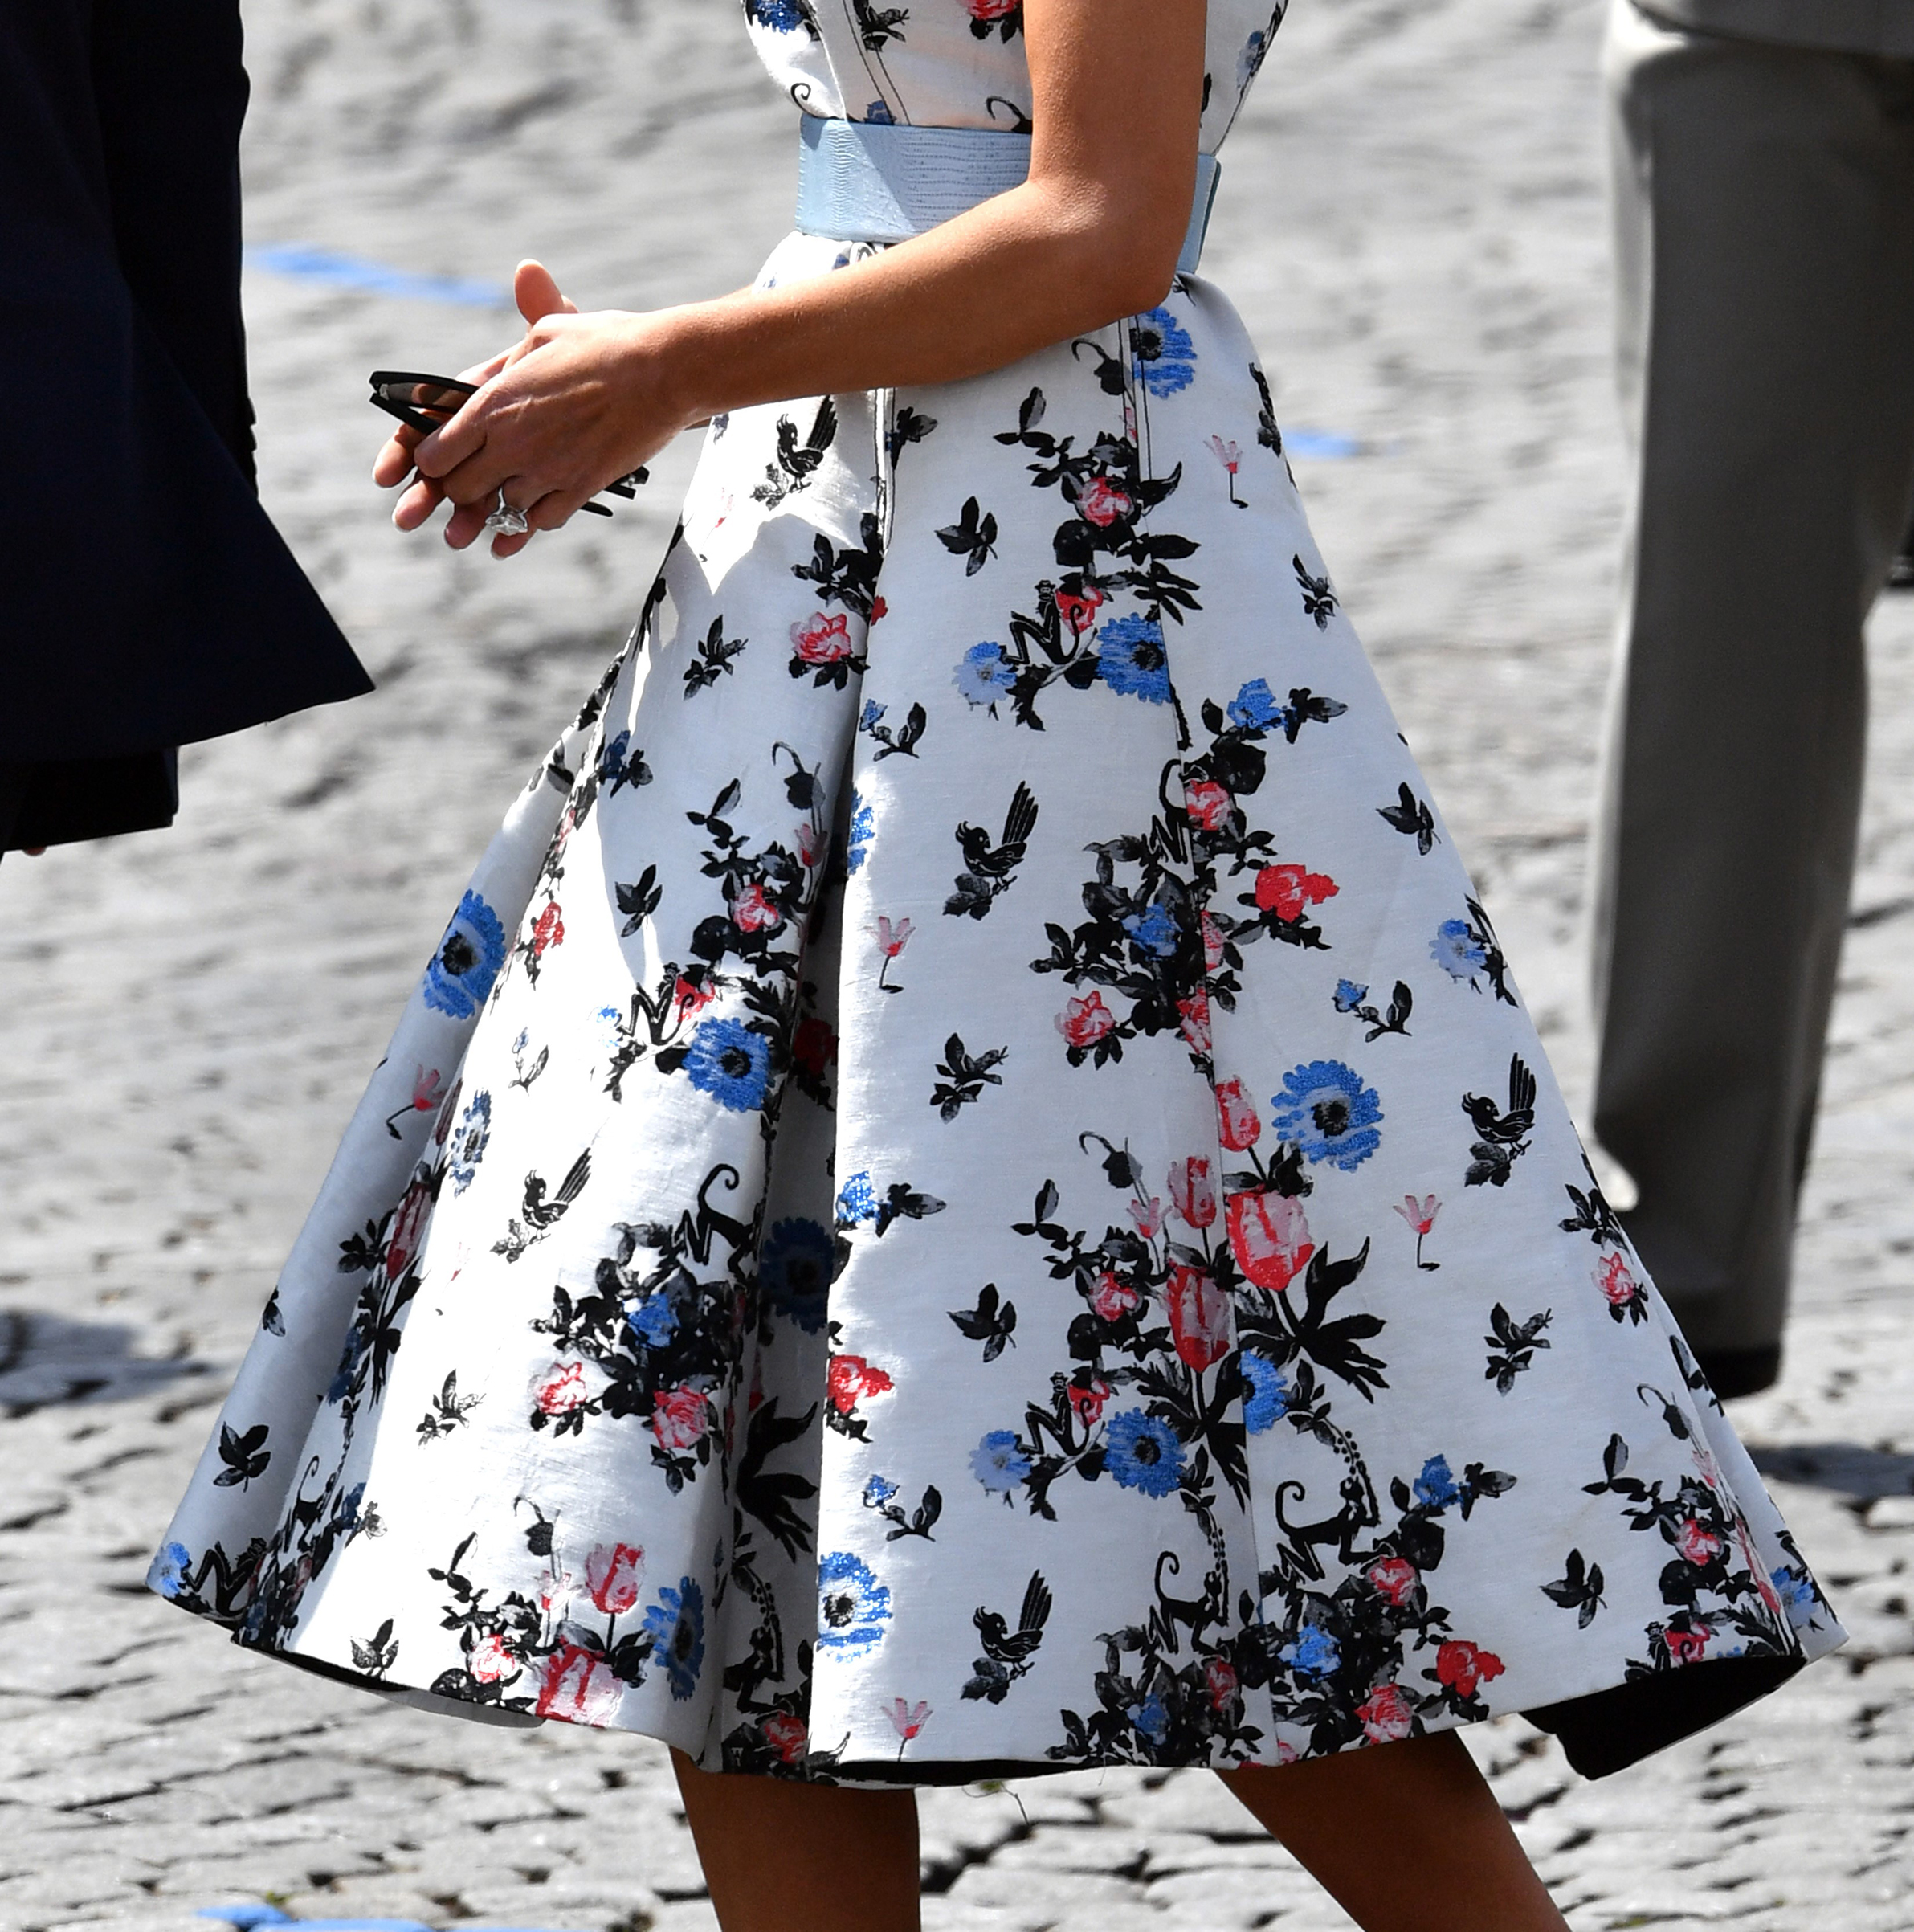 A section of First lady Melania Trump's Valentino dress as she attends the annual Bastille Day military parade along Avenue des Champs-Elysees in Paris, France on July 14, 2017.